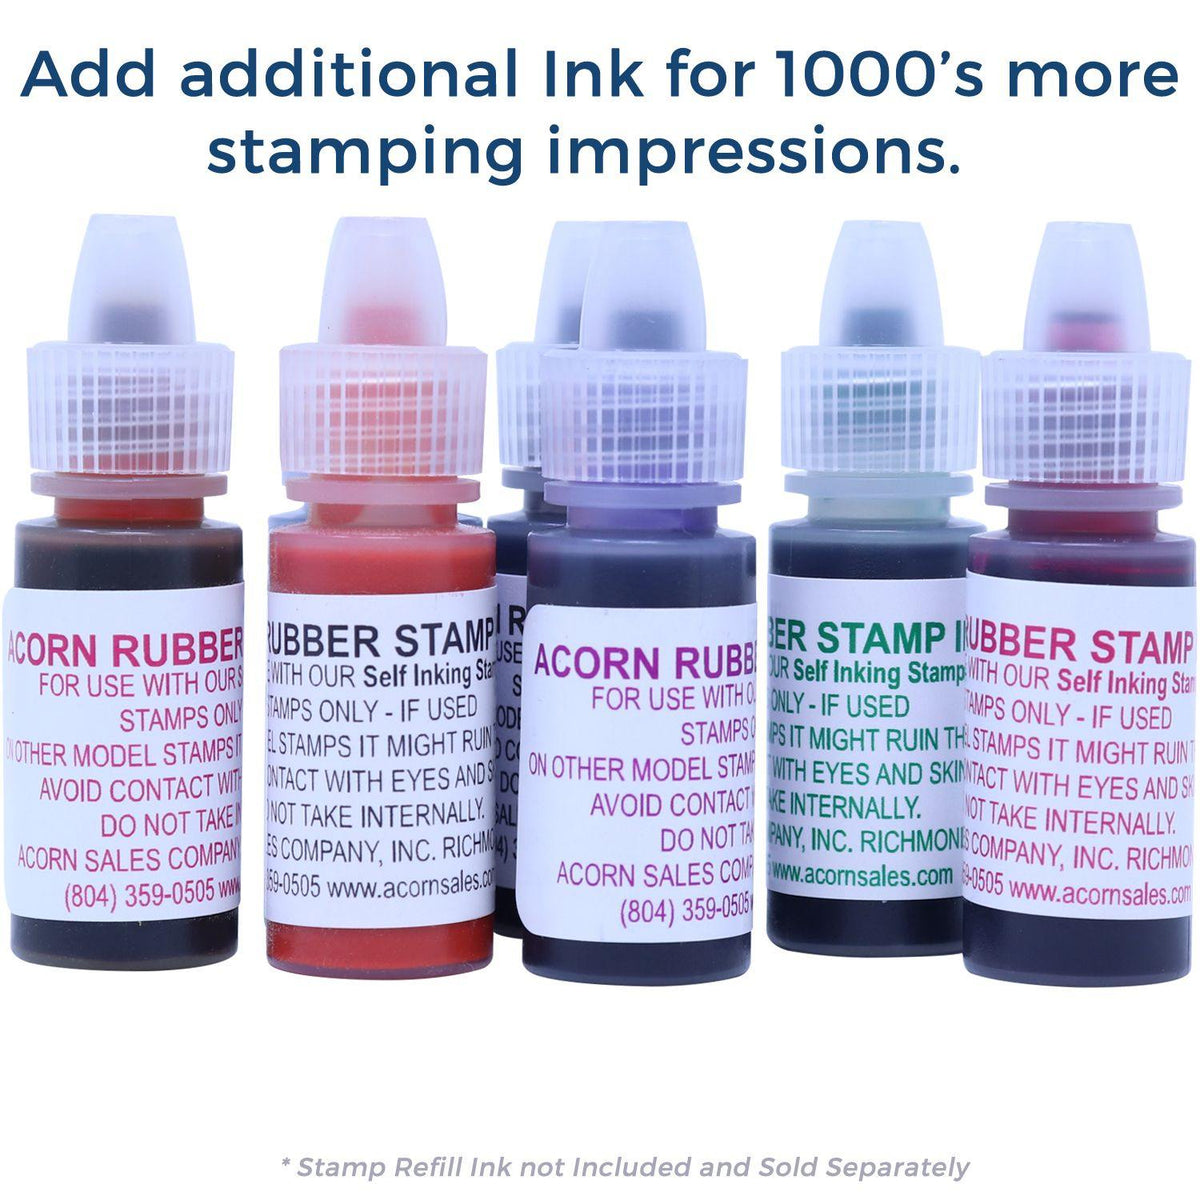 Refill Inks for Large Pre-Inked Standard Mail Stacked Stamp Available